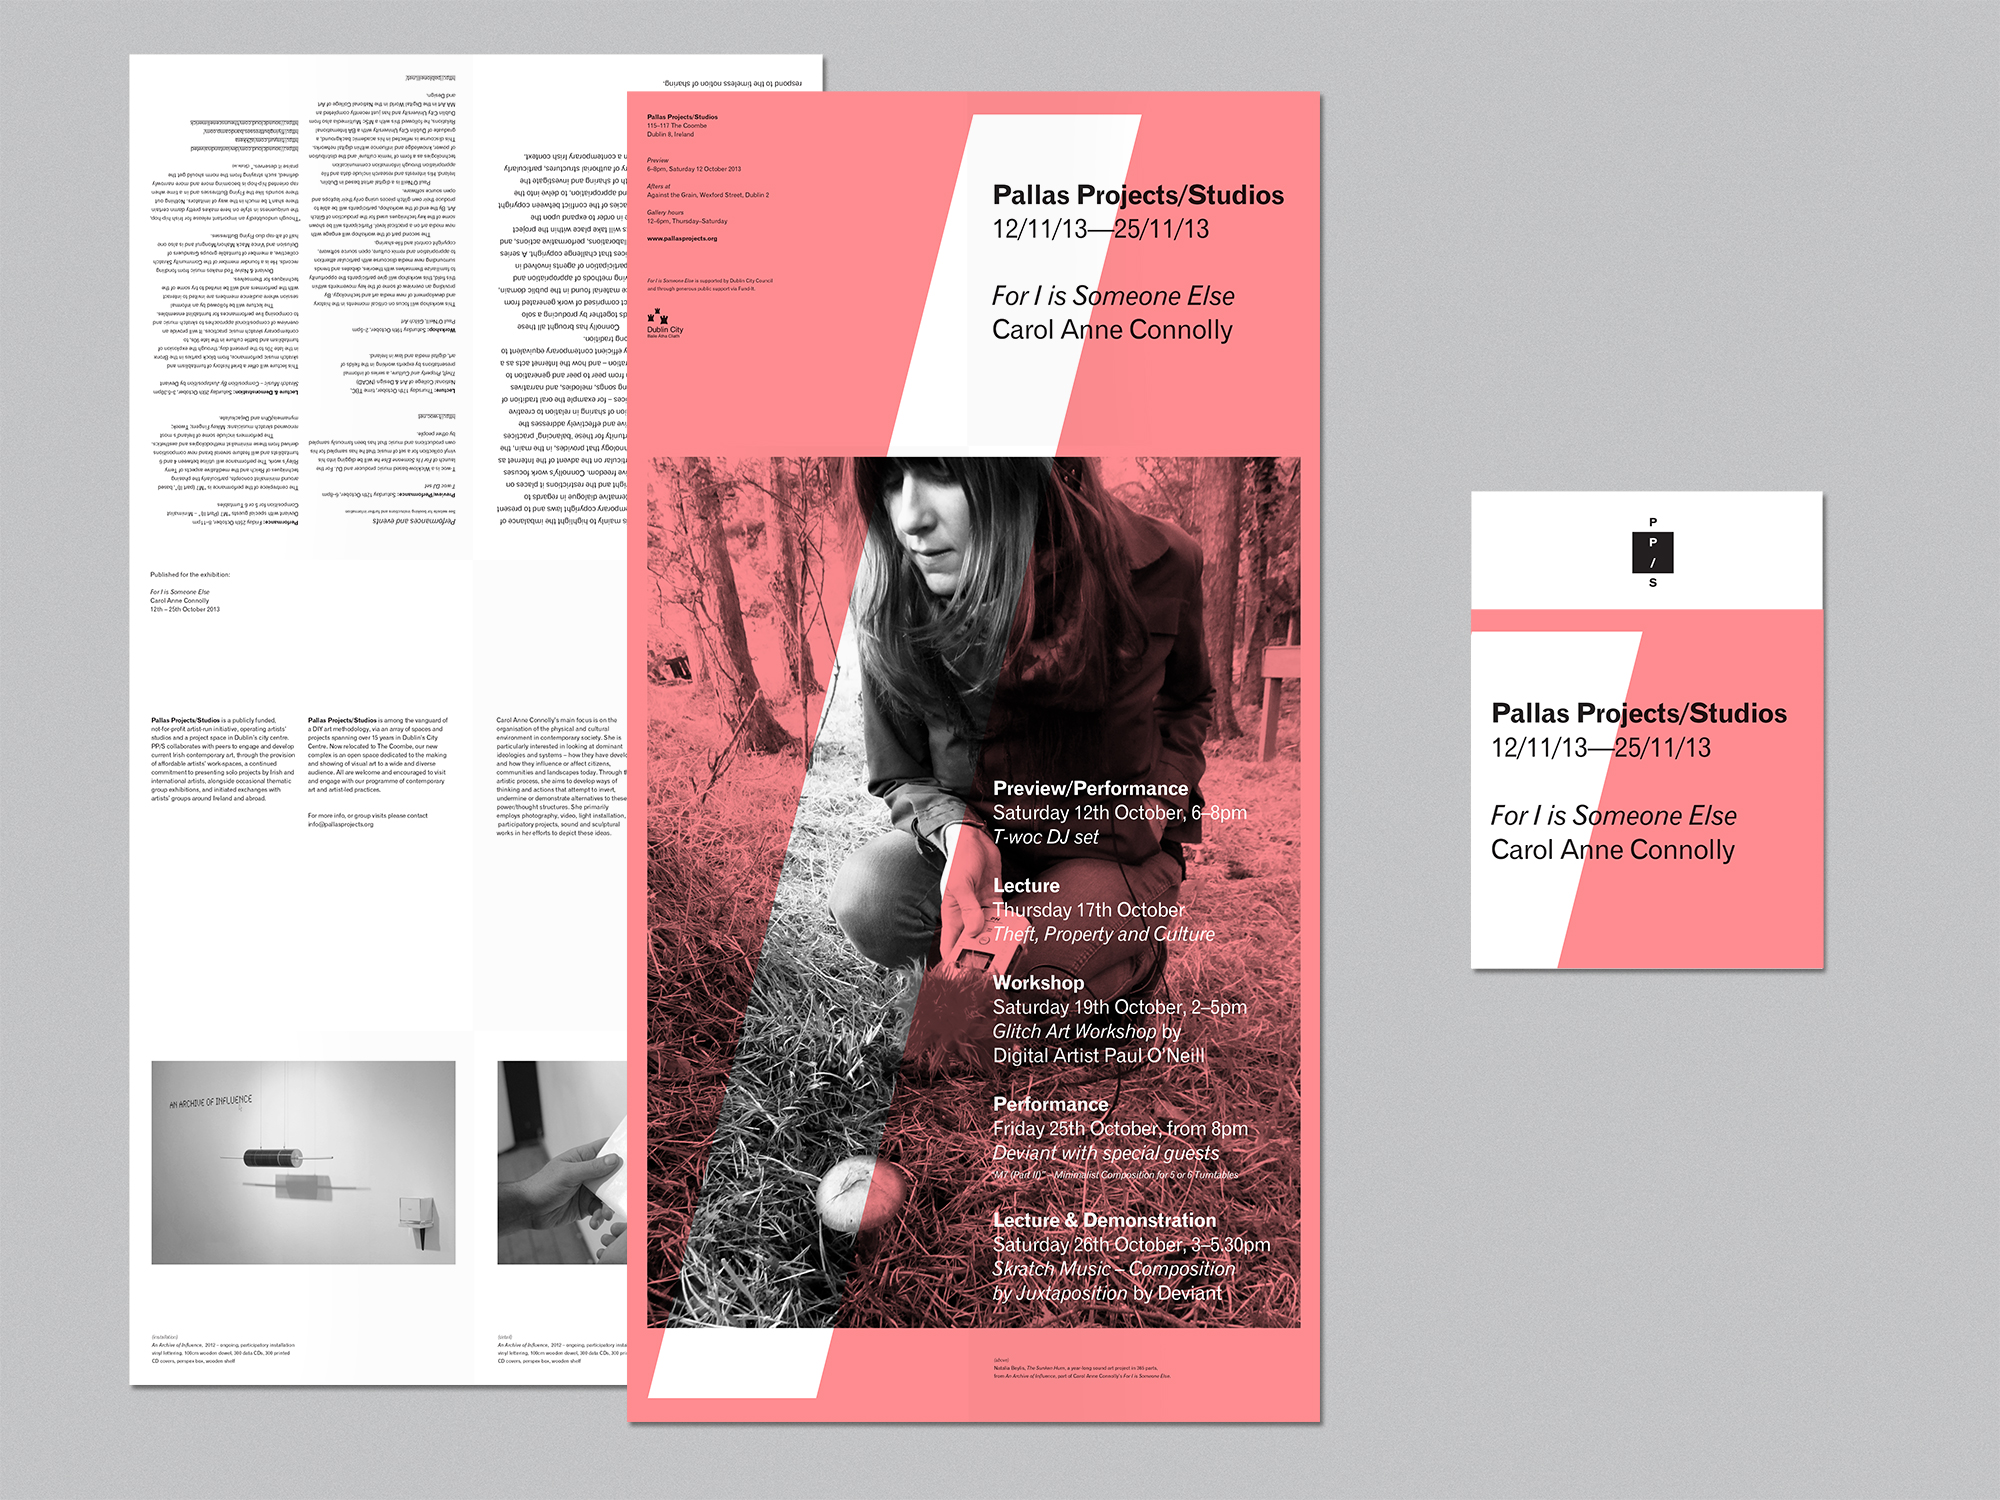 Cover image: PP/S Exhibition Guides/Posters (2013)